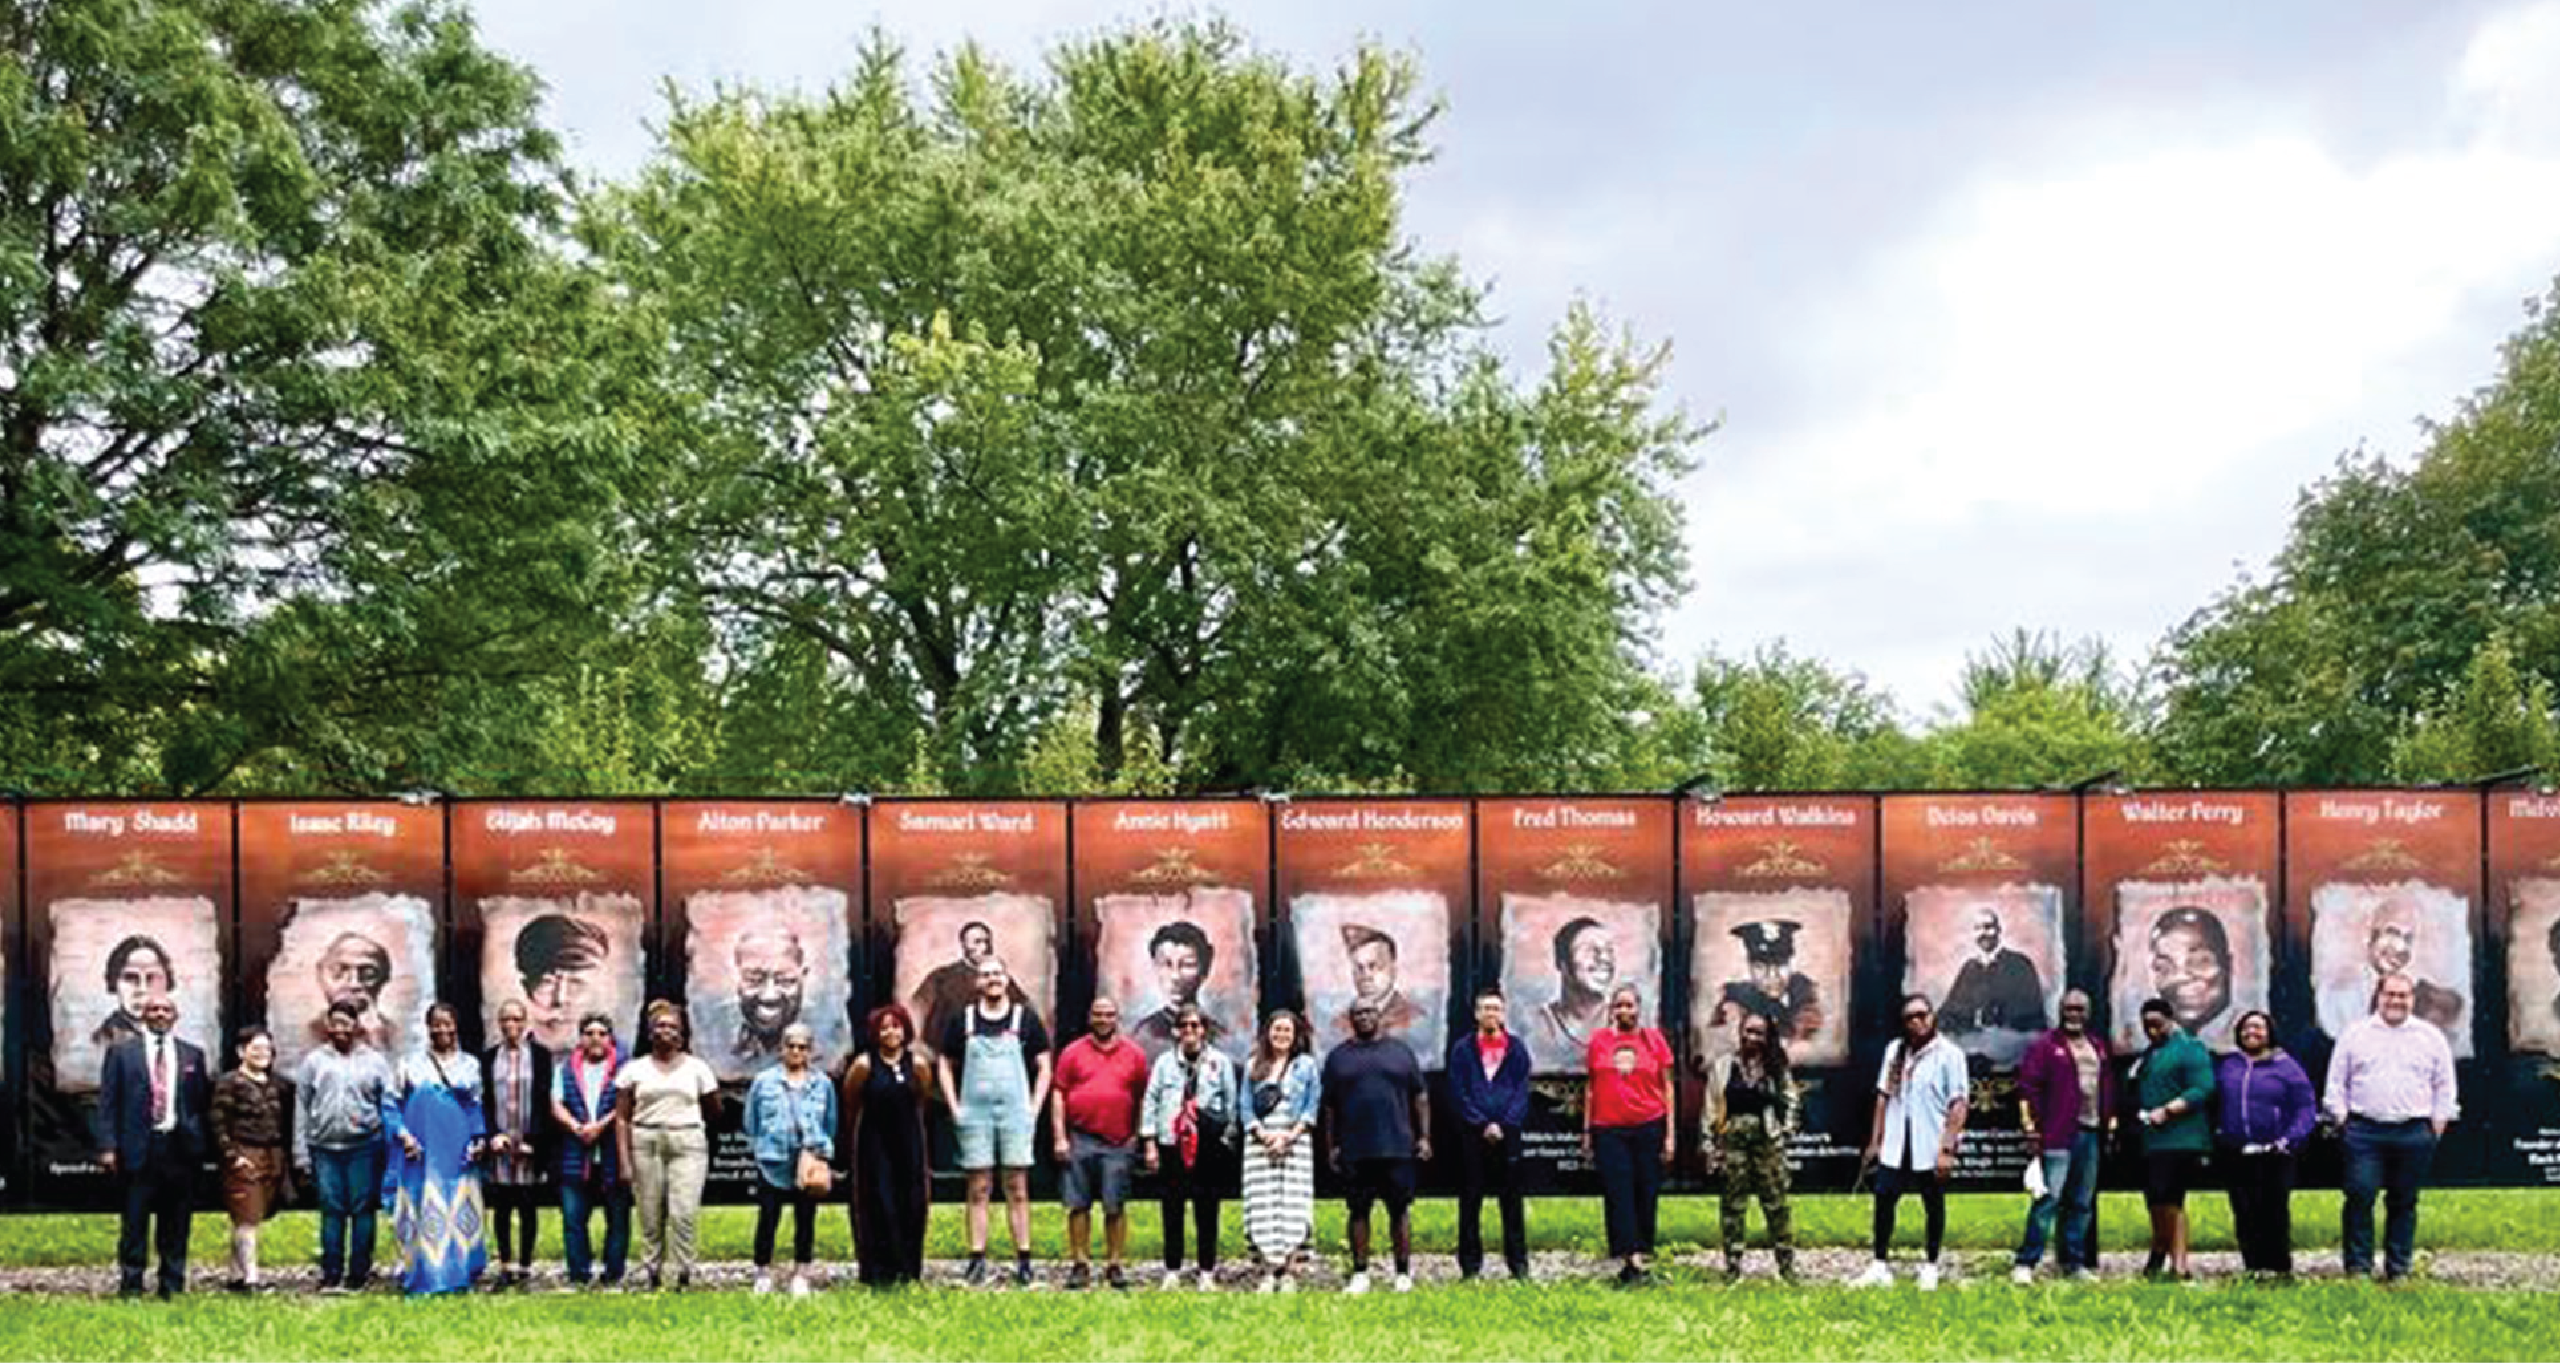 Image of a group of people in front of Patterson Park Black historic Murals.